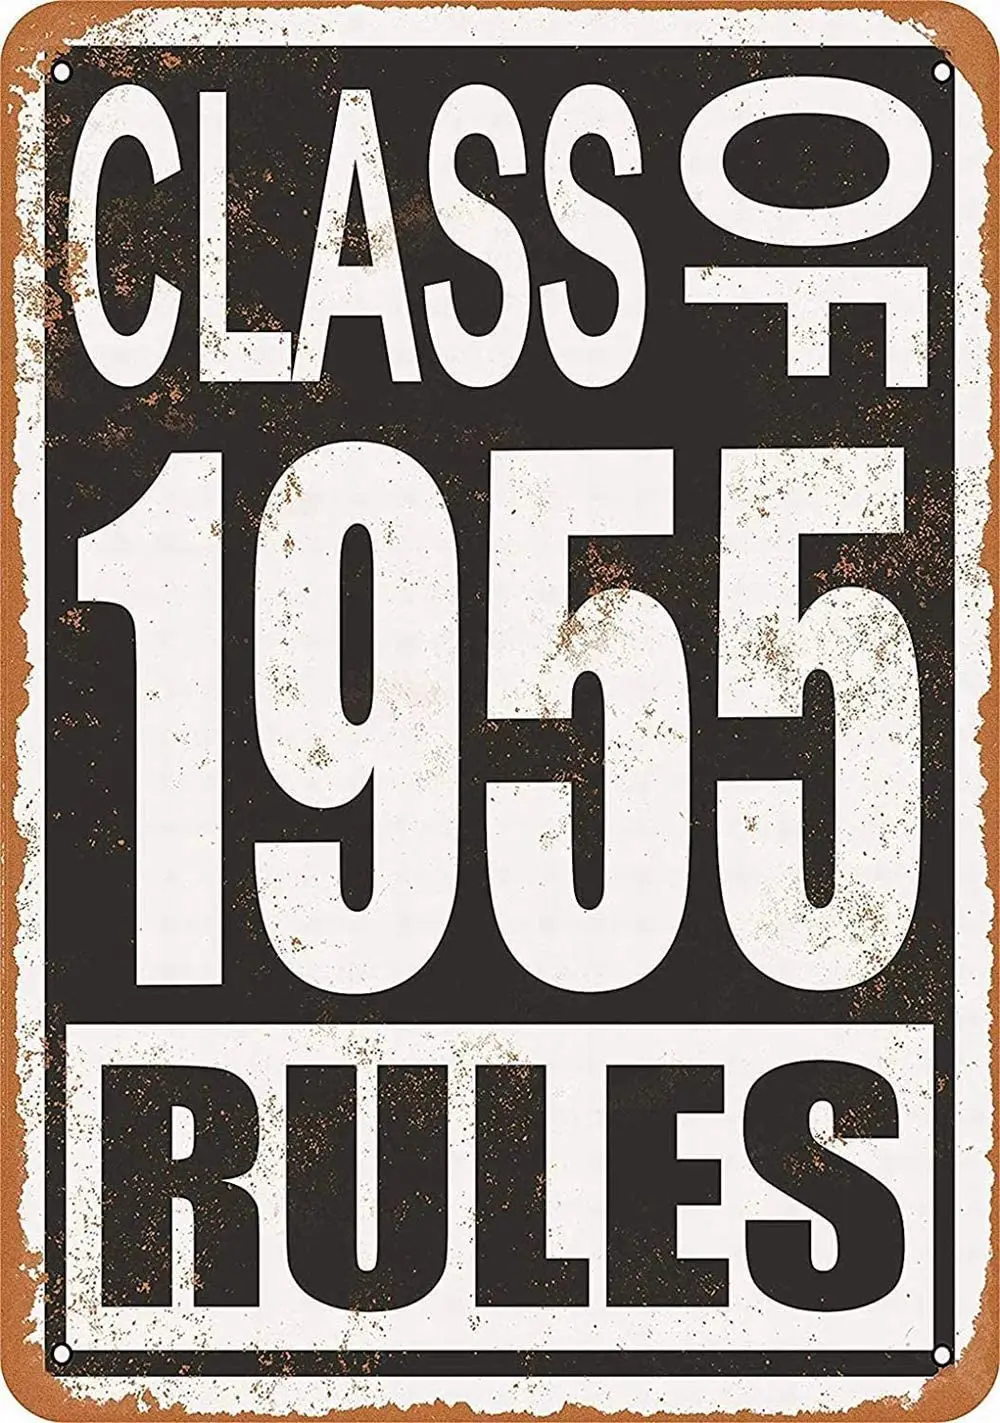 

Class of 1955 Rules Retro Tin Signs Vintage Look Sign Metal Plaques for Pub Man Cave Bar Club Wall Decor 8 X 12 Inch